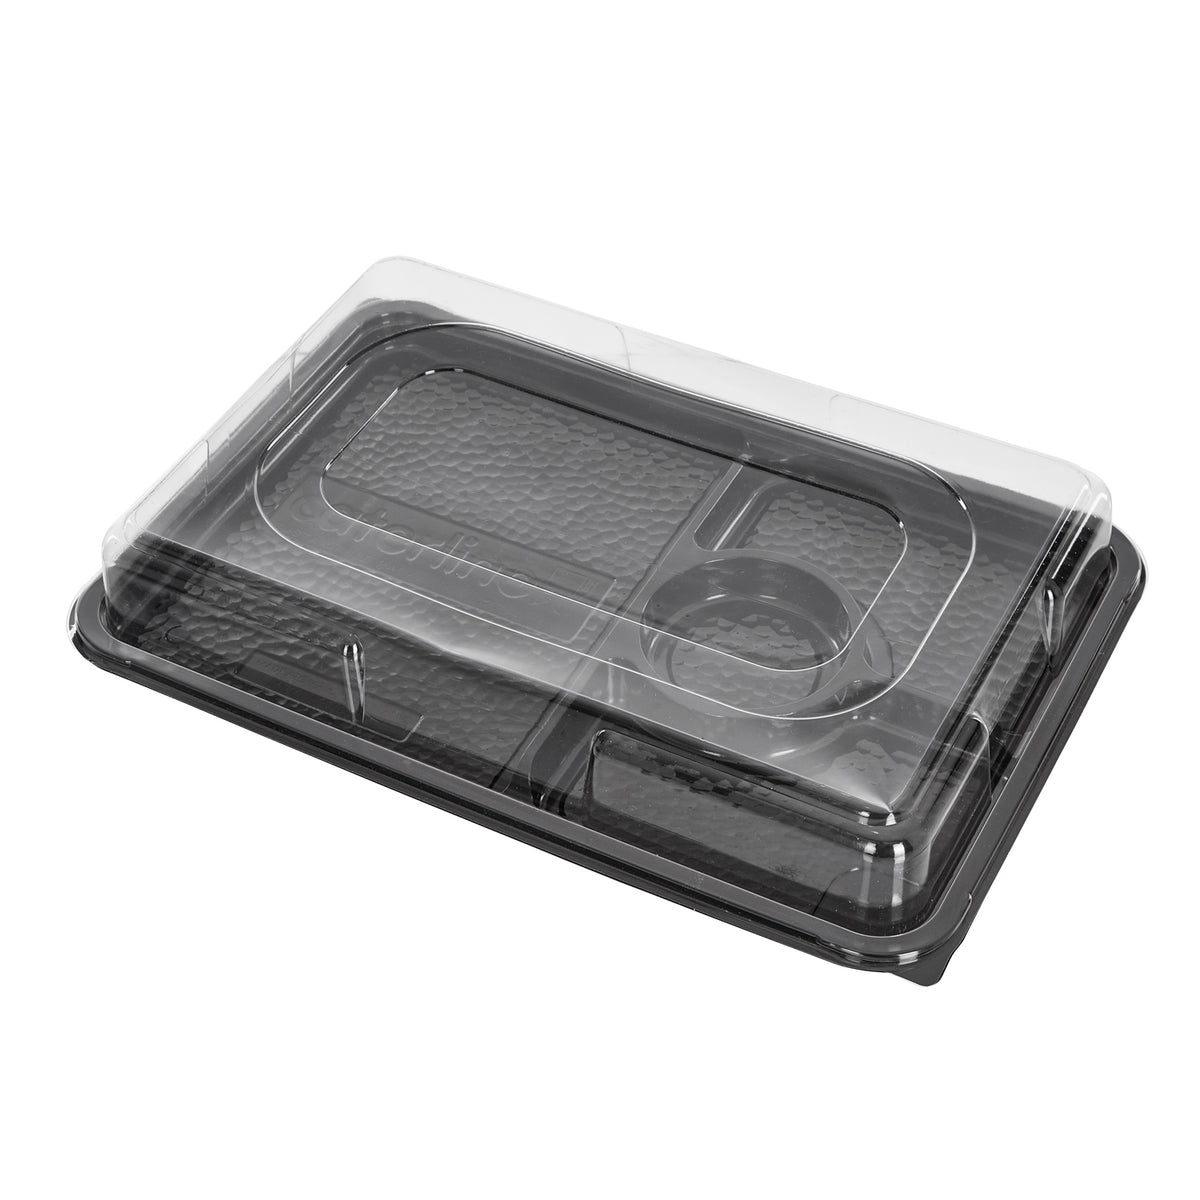 5 x Large Black Dips Trays with lids for Party Food and Dips (450mm x 310mm) - Caterline -